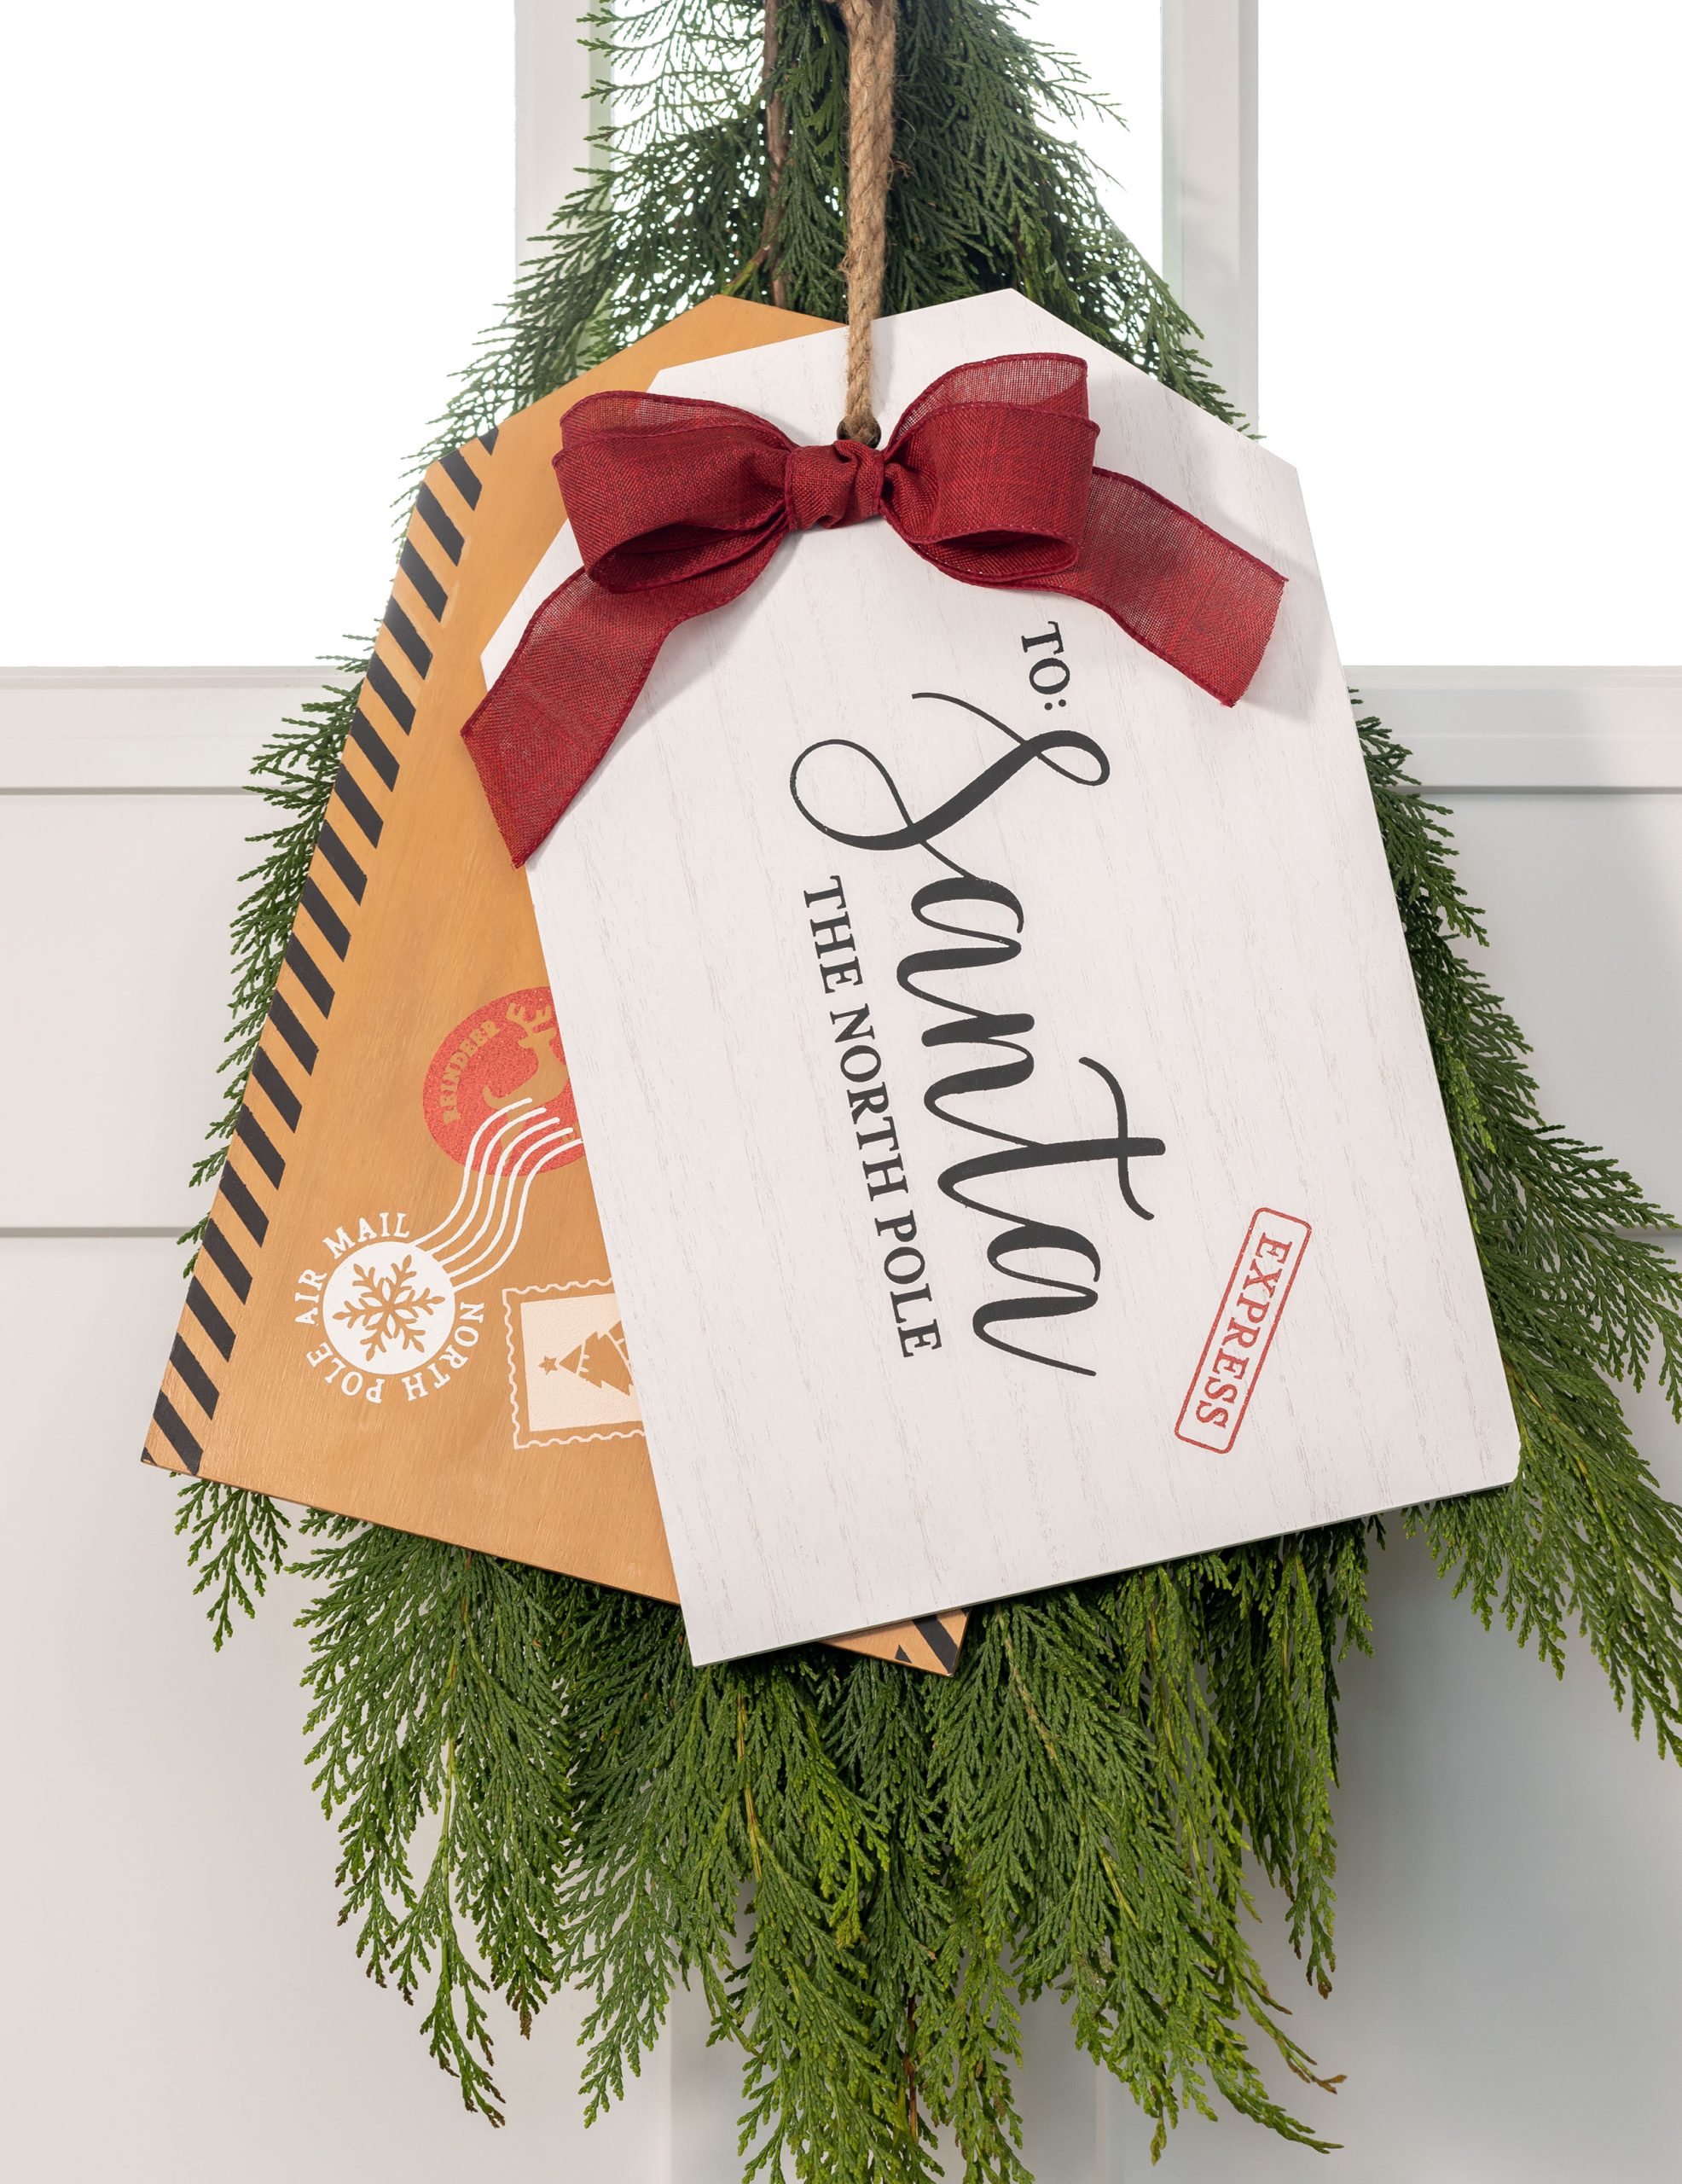 Create with the new Santa design from the 2022 Holiday Collection! I can imagine so many fun craft ideas, love this double tag for the front door!